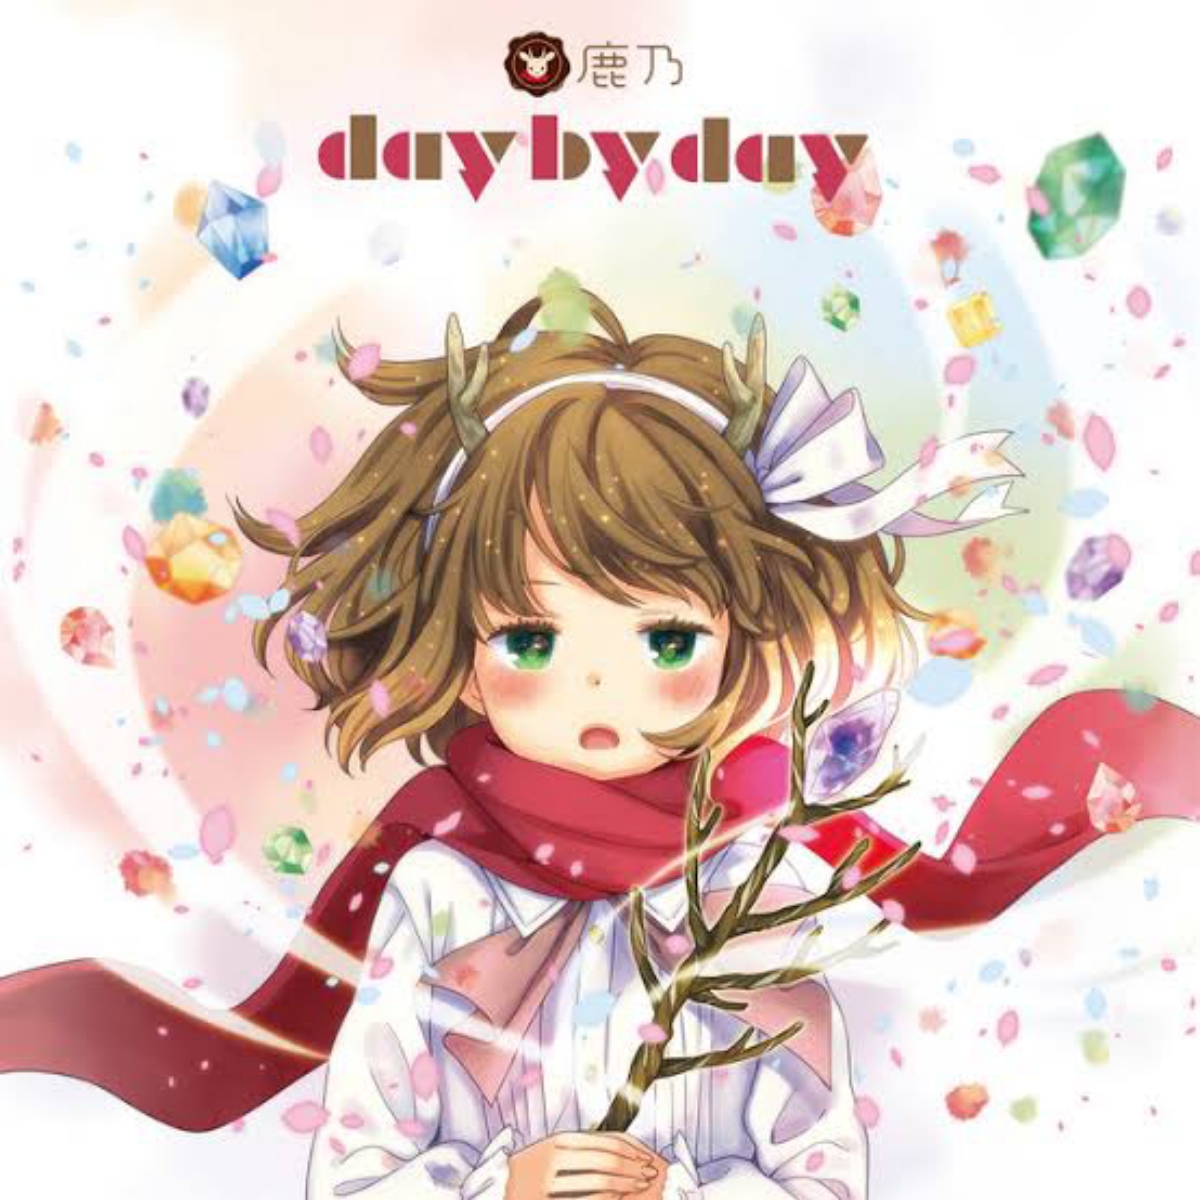 day by day - Osanime